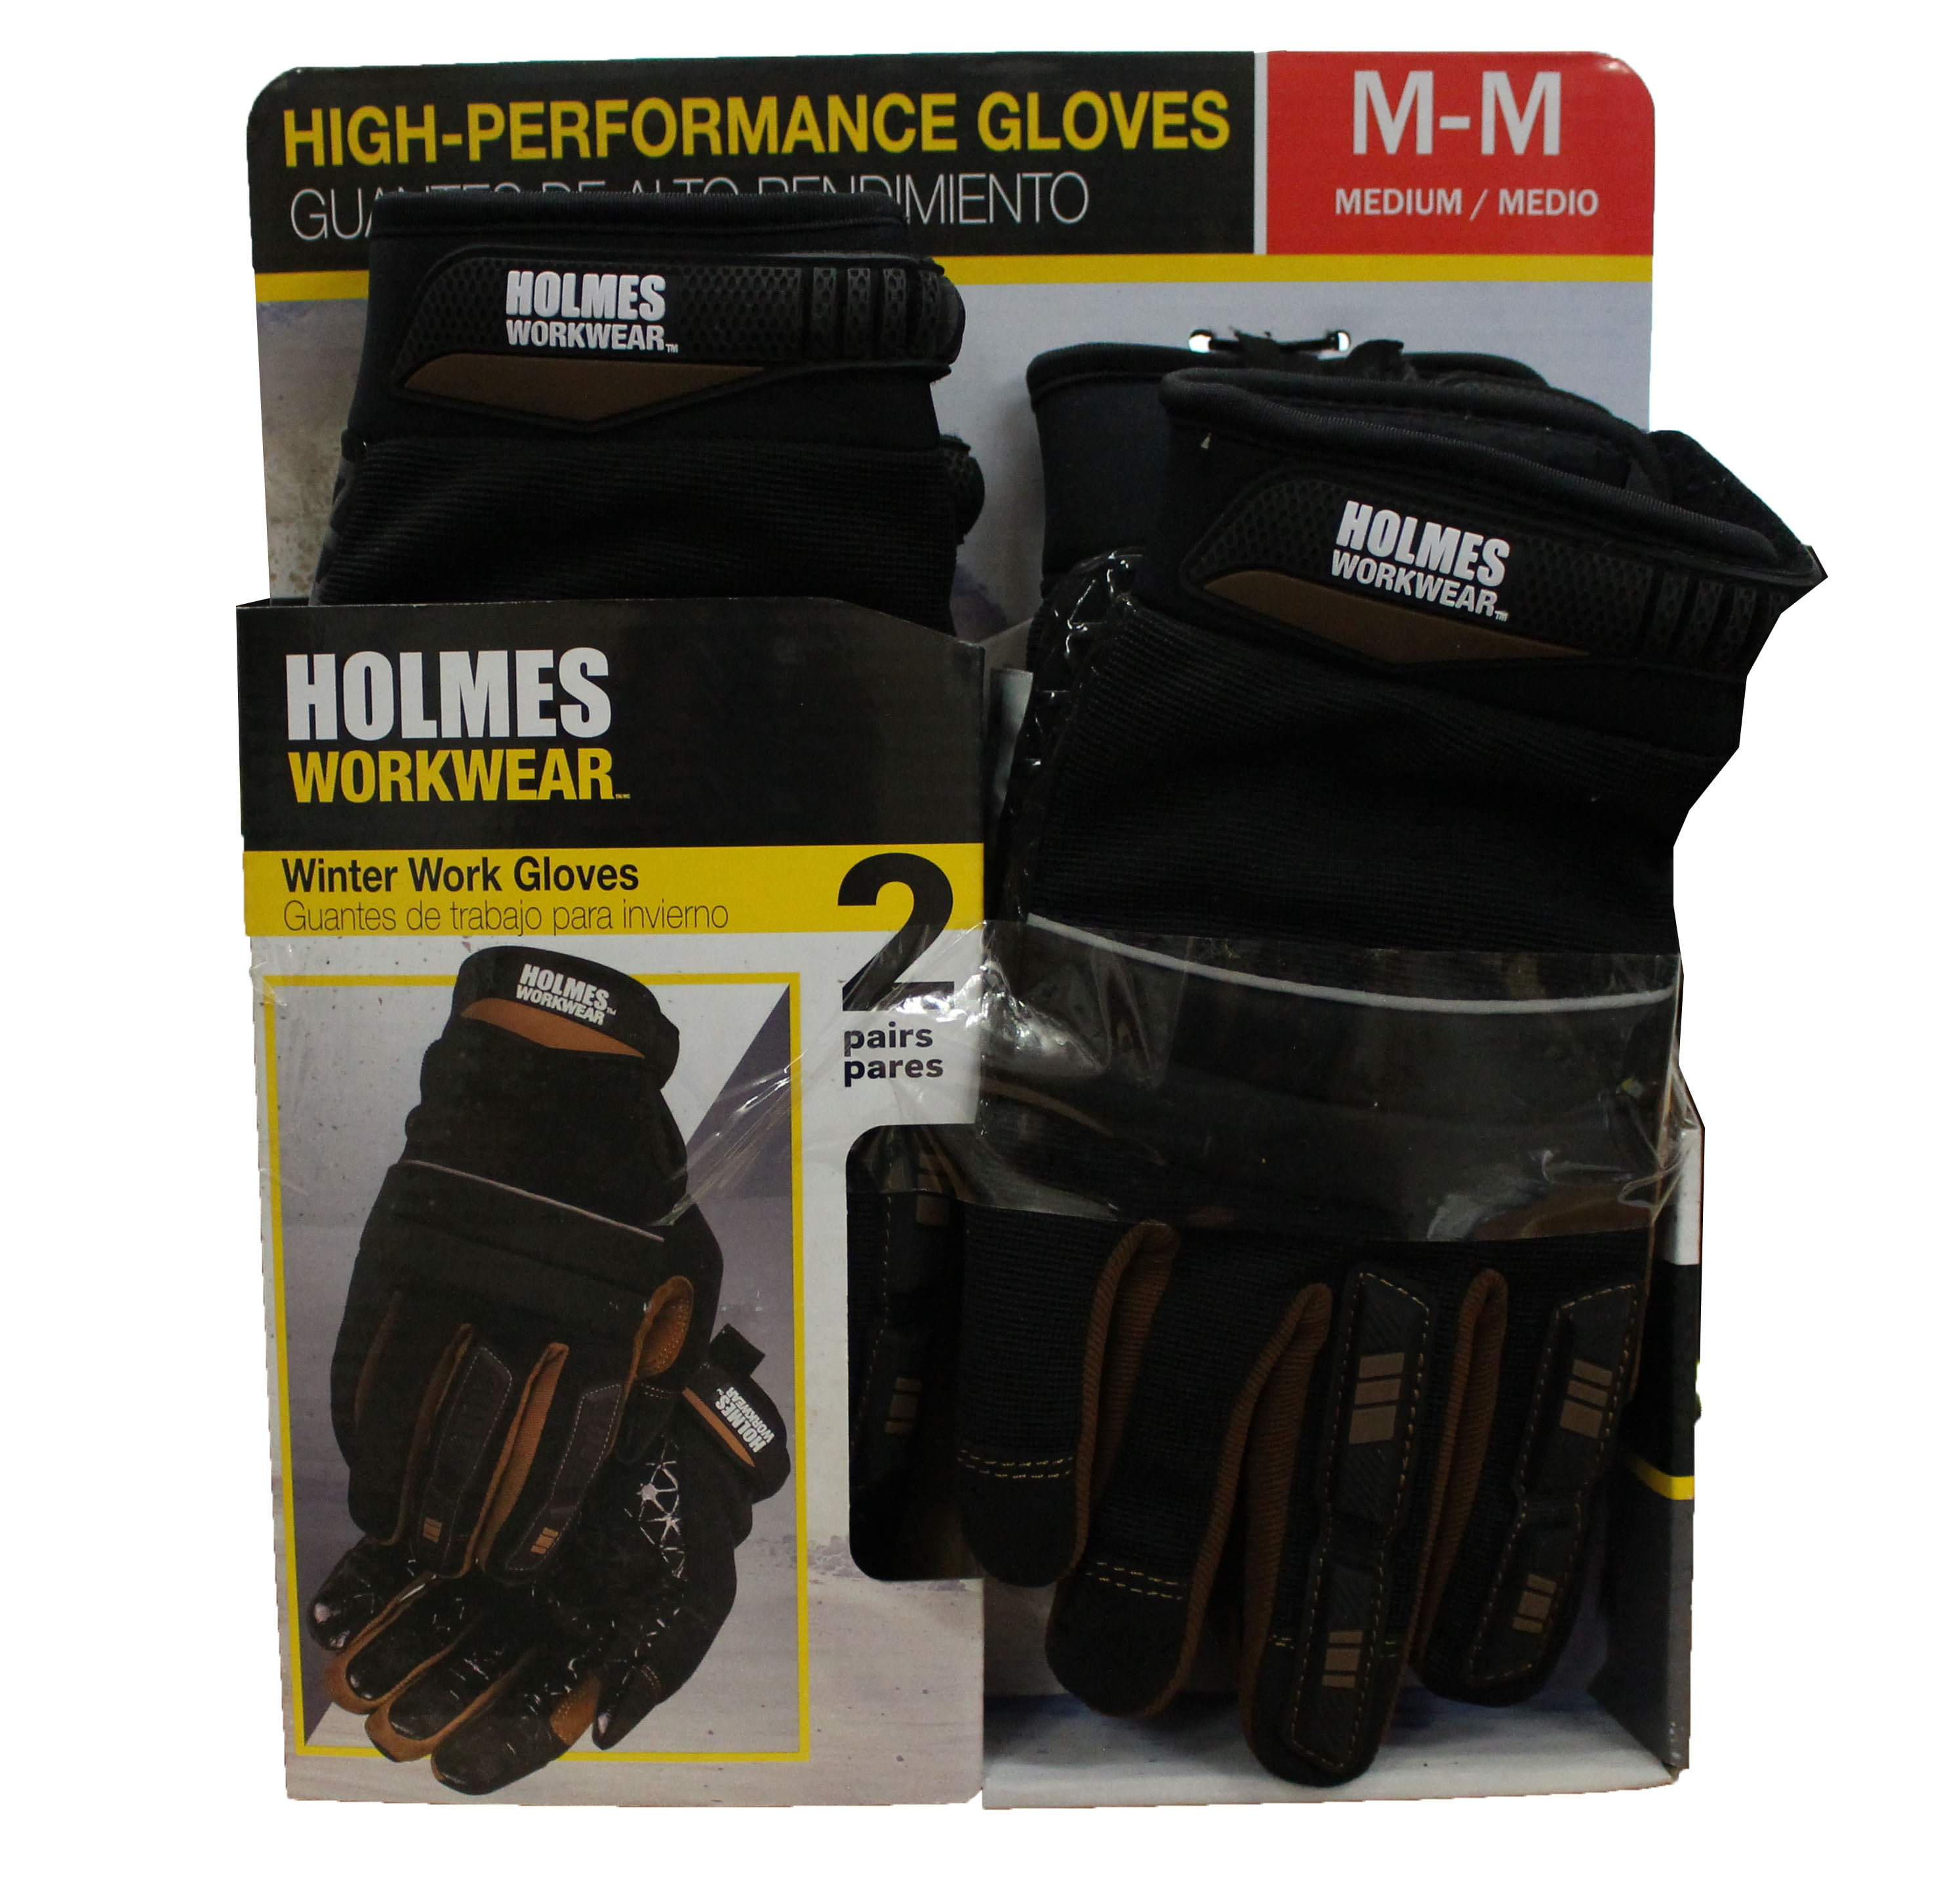 NEW 3M Thinsulate 40 Gram Cold Weather Leather Nylon Work Gloves Sz Med M 67368 